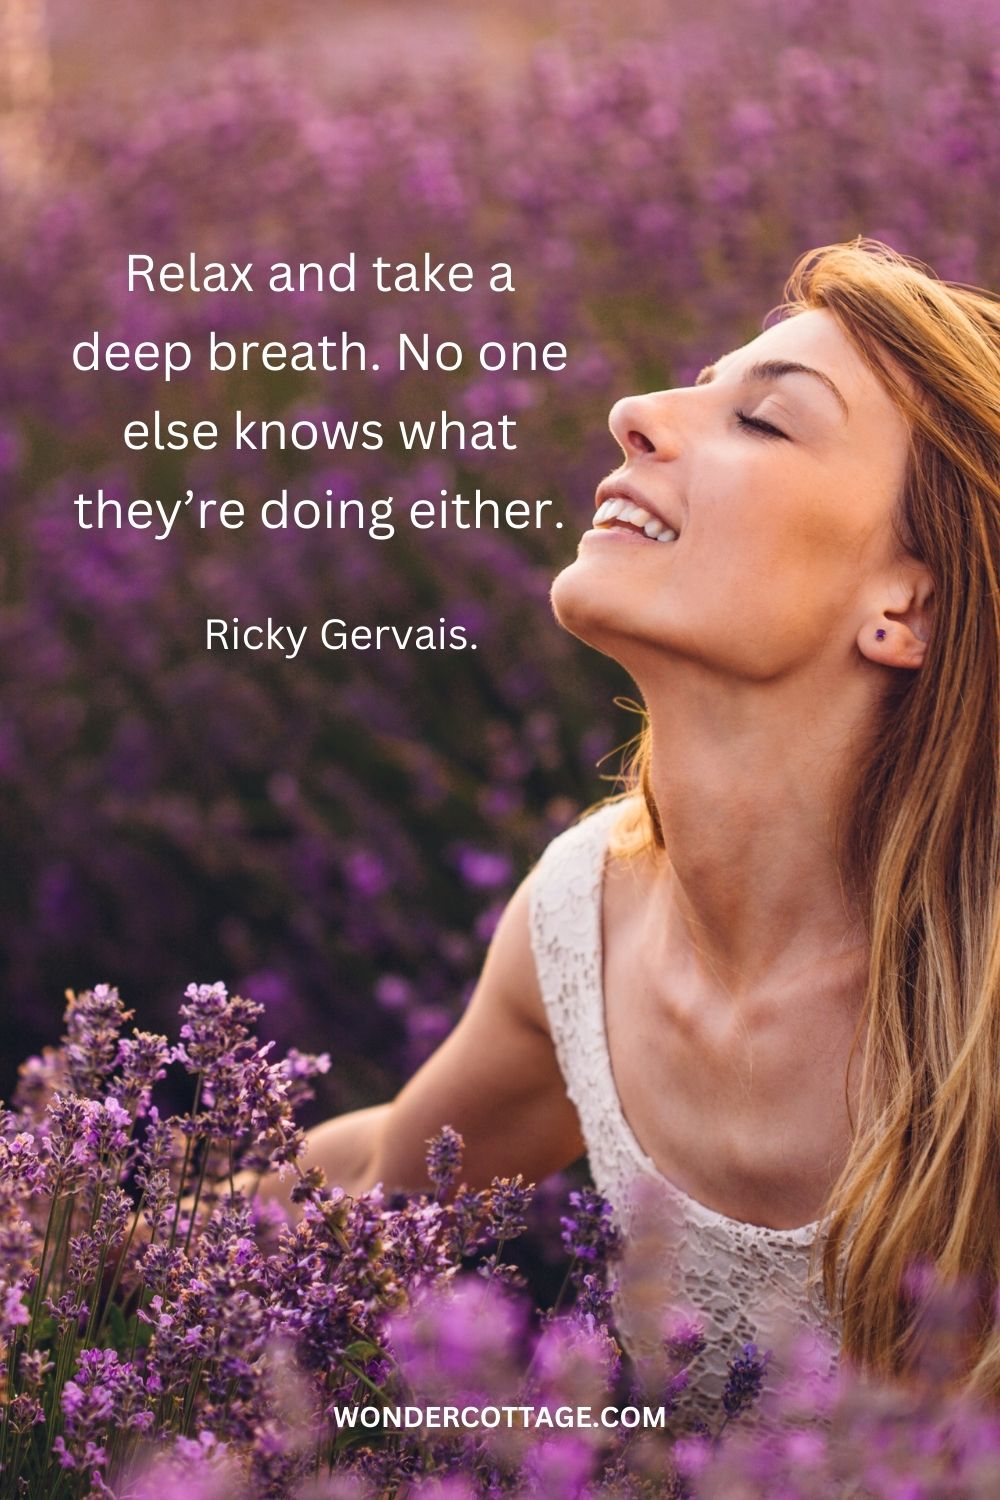 Relax and take a deep breath. No one else knows what they’re doing either. Ricky Gervais.